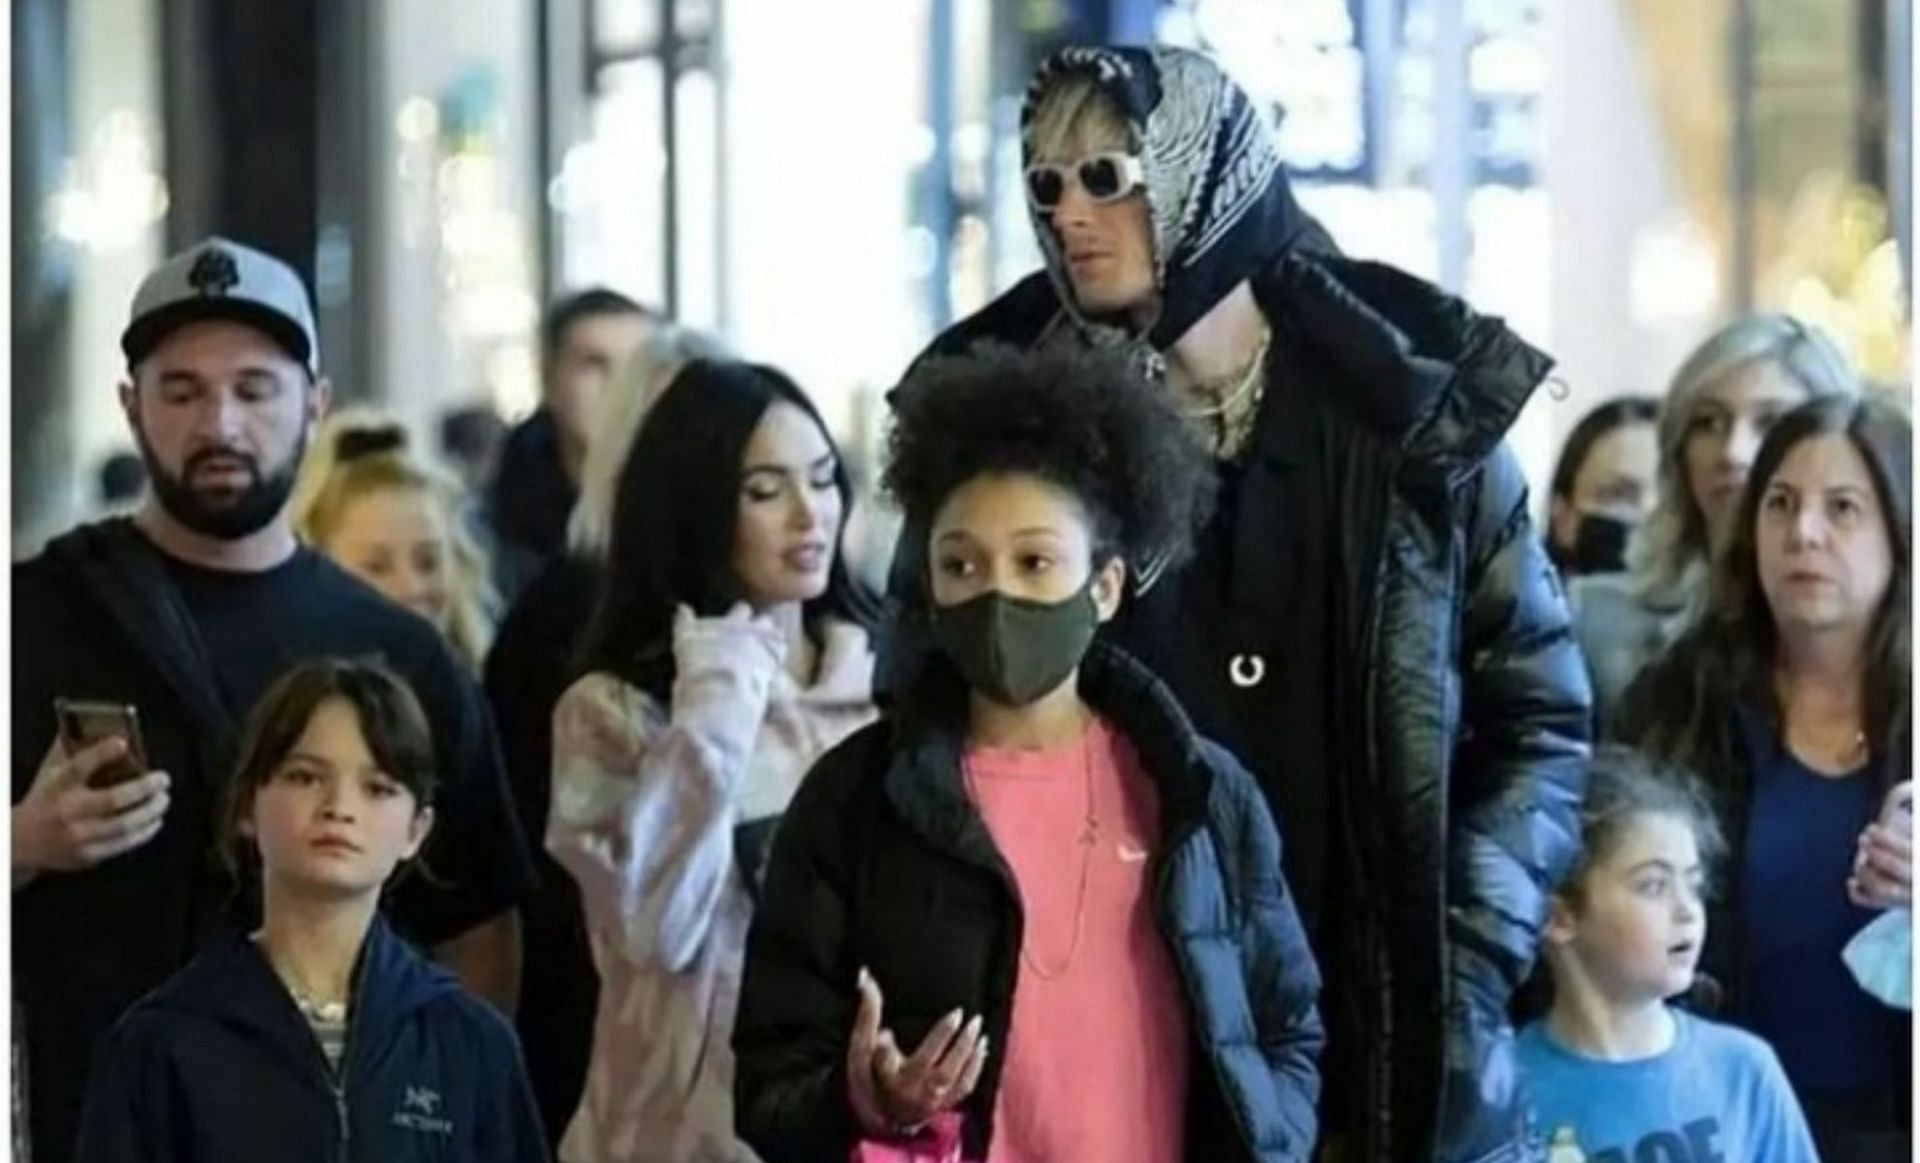 Machine Gun Kelly and Megan Fox goes shopping with kids in Greece(image via theblondedon5/instagram)